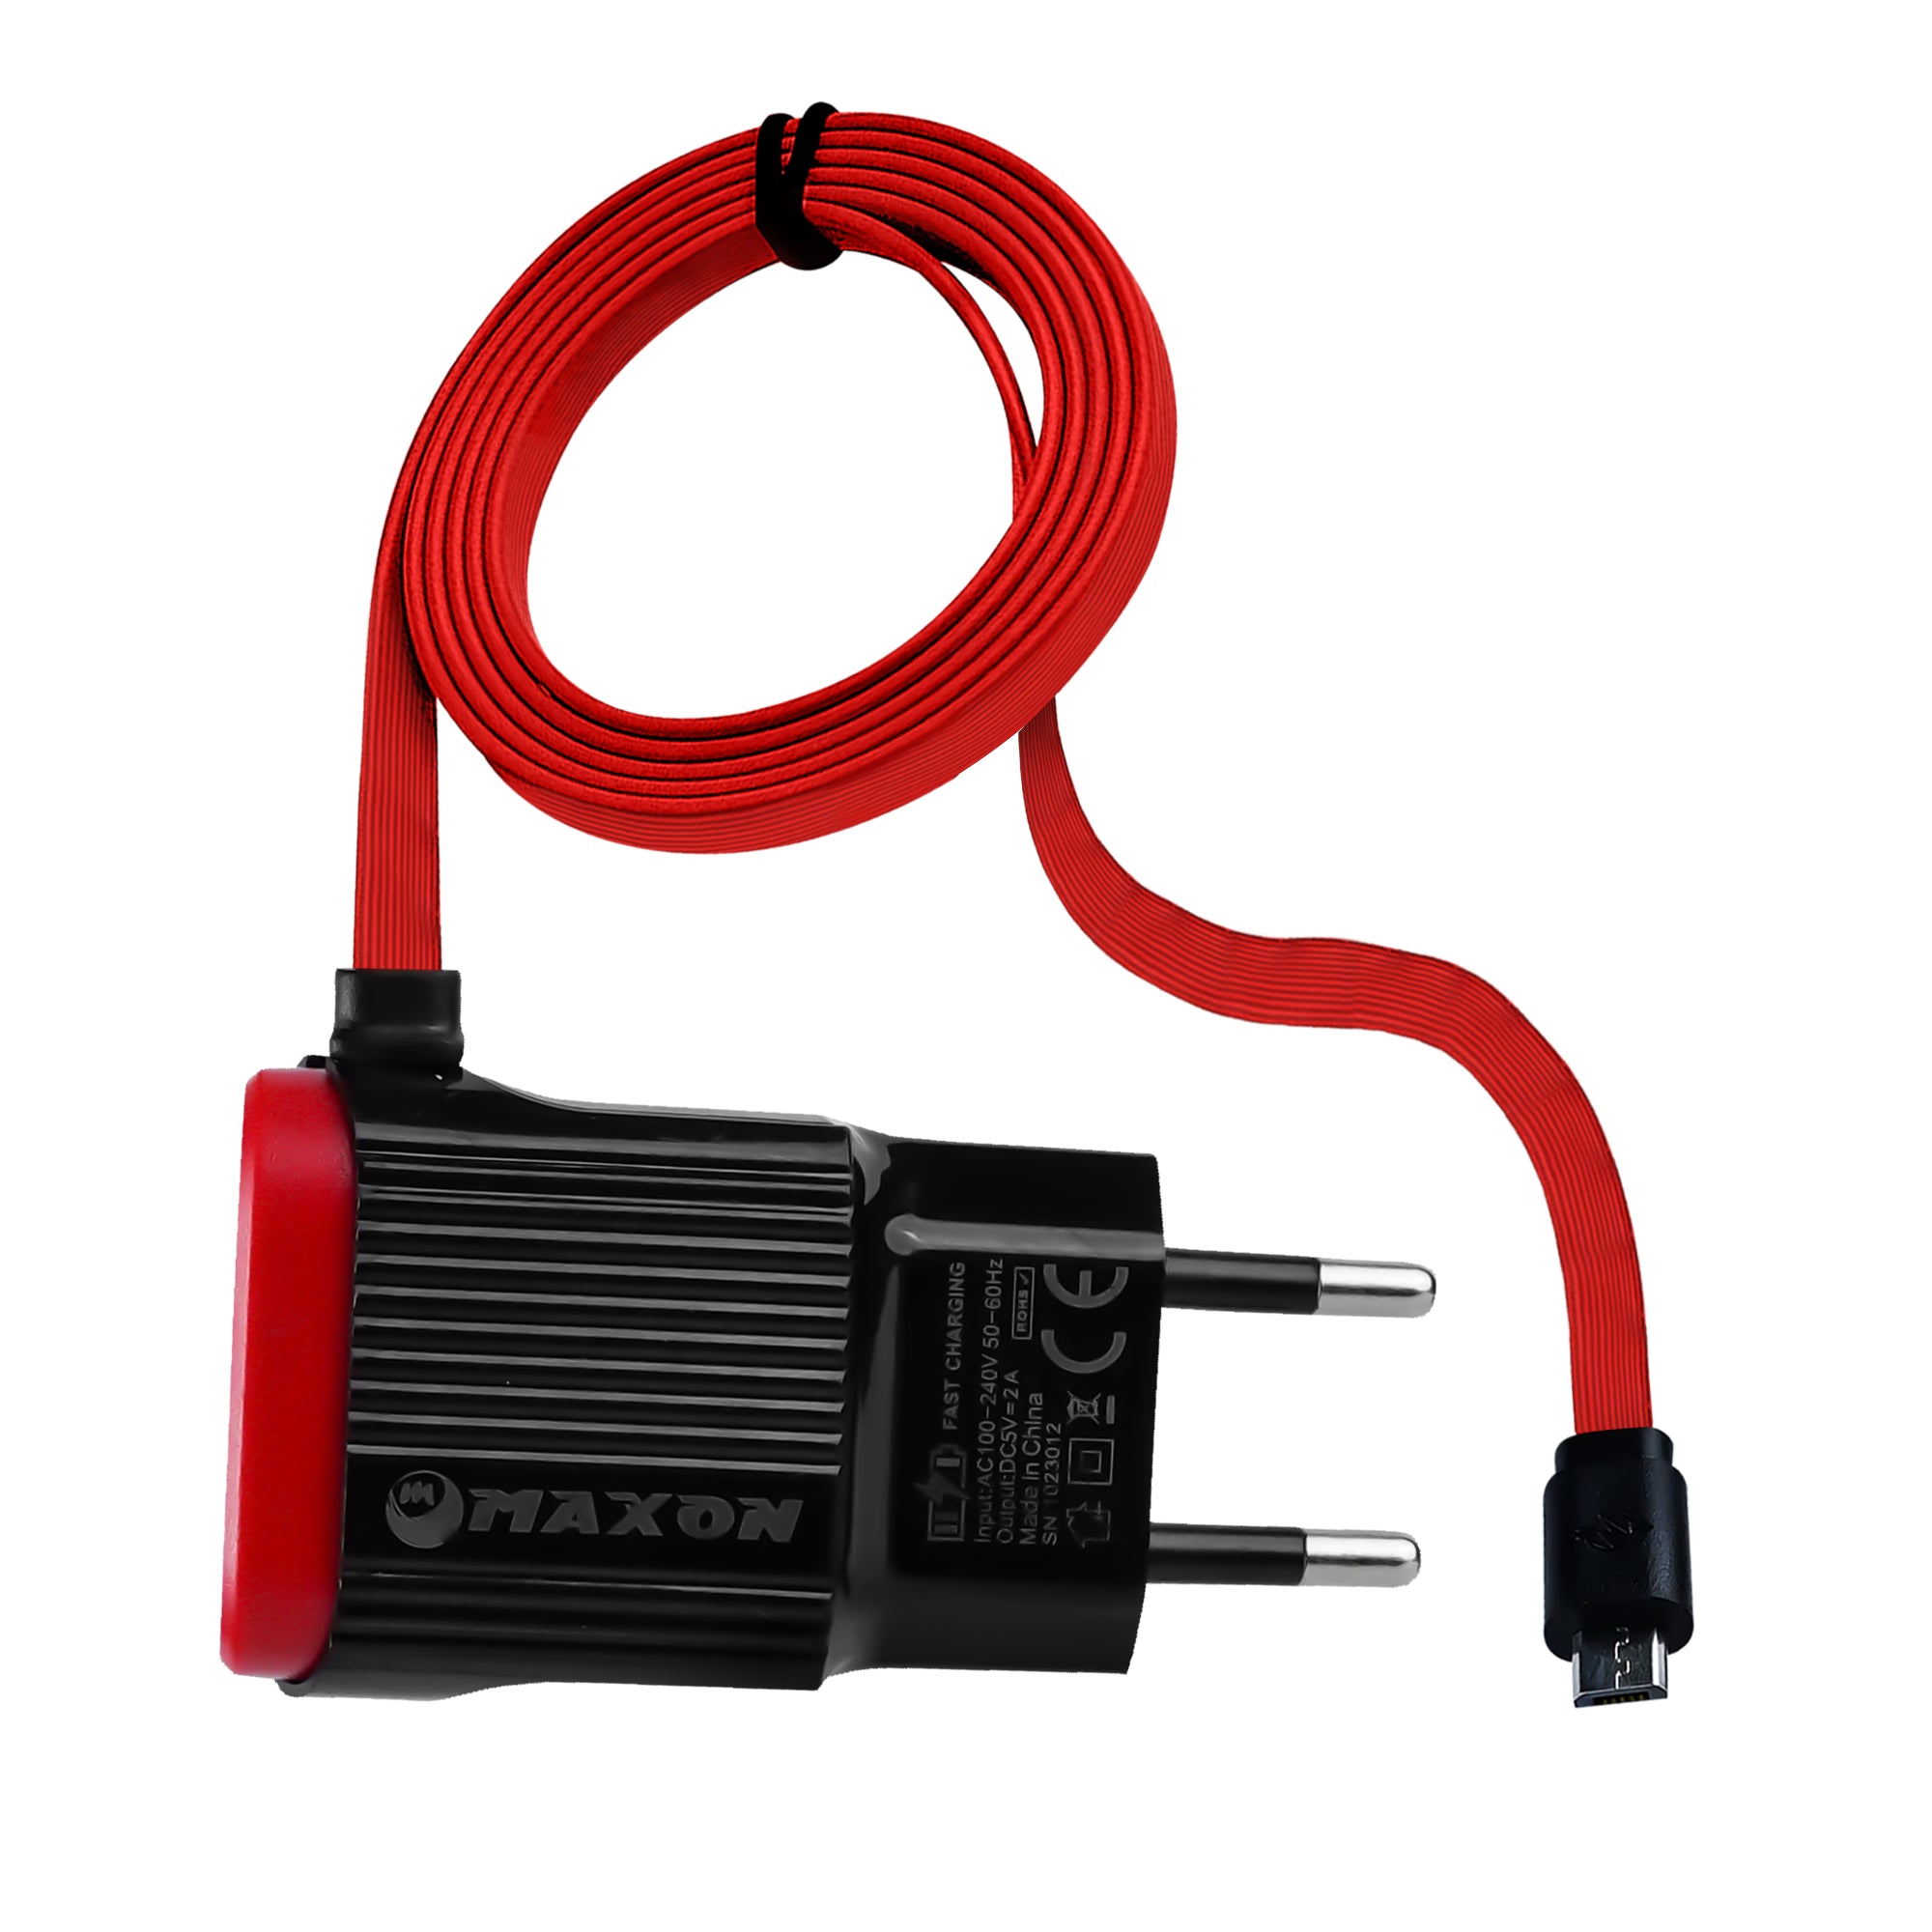 MAXON CP-08 CHARGER